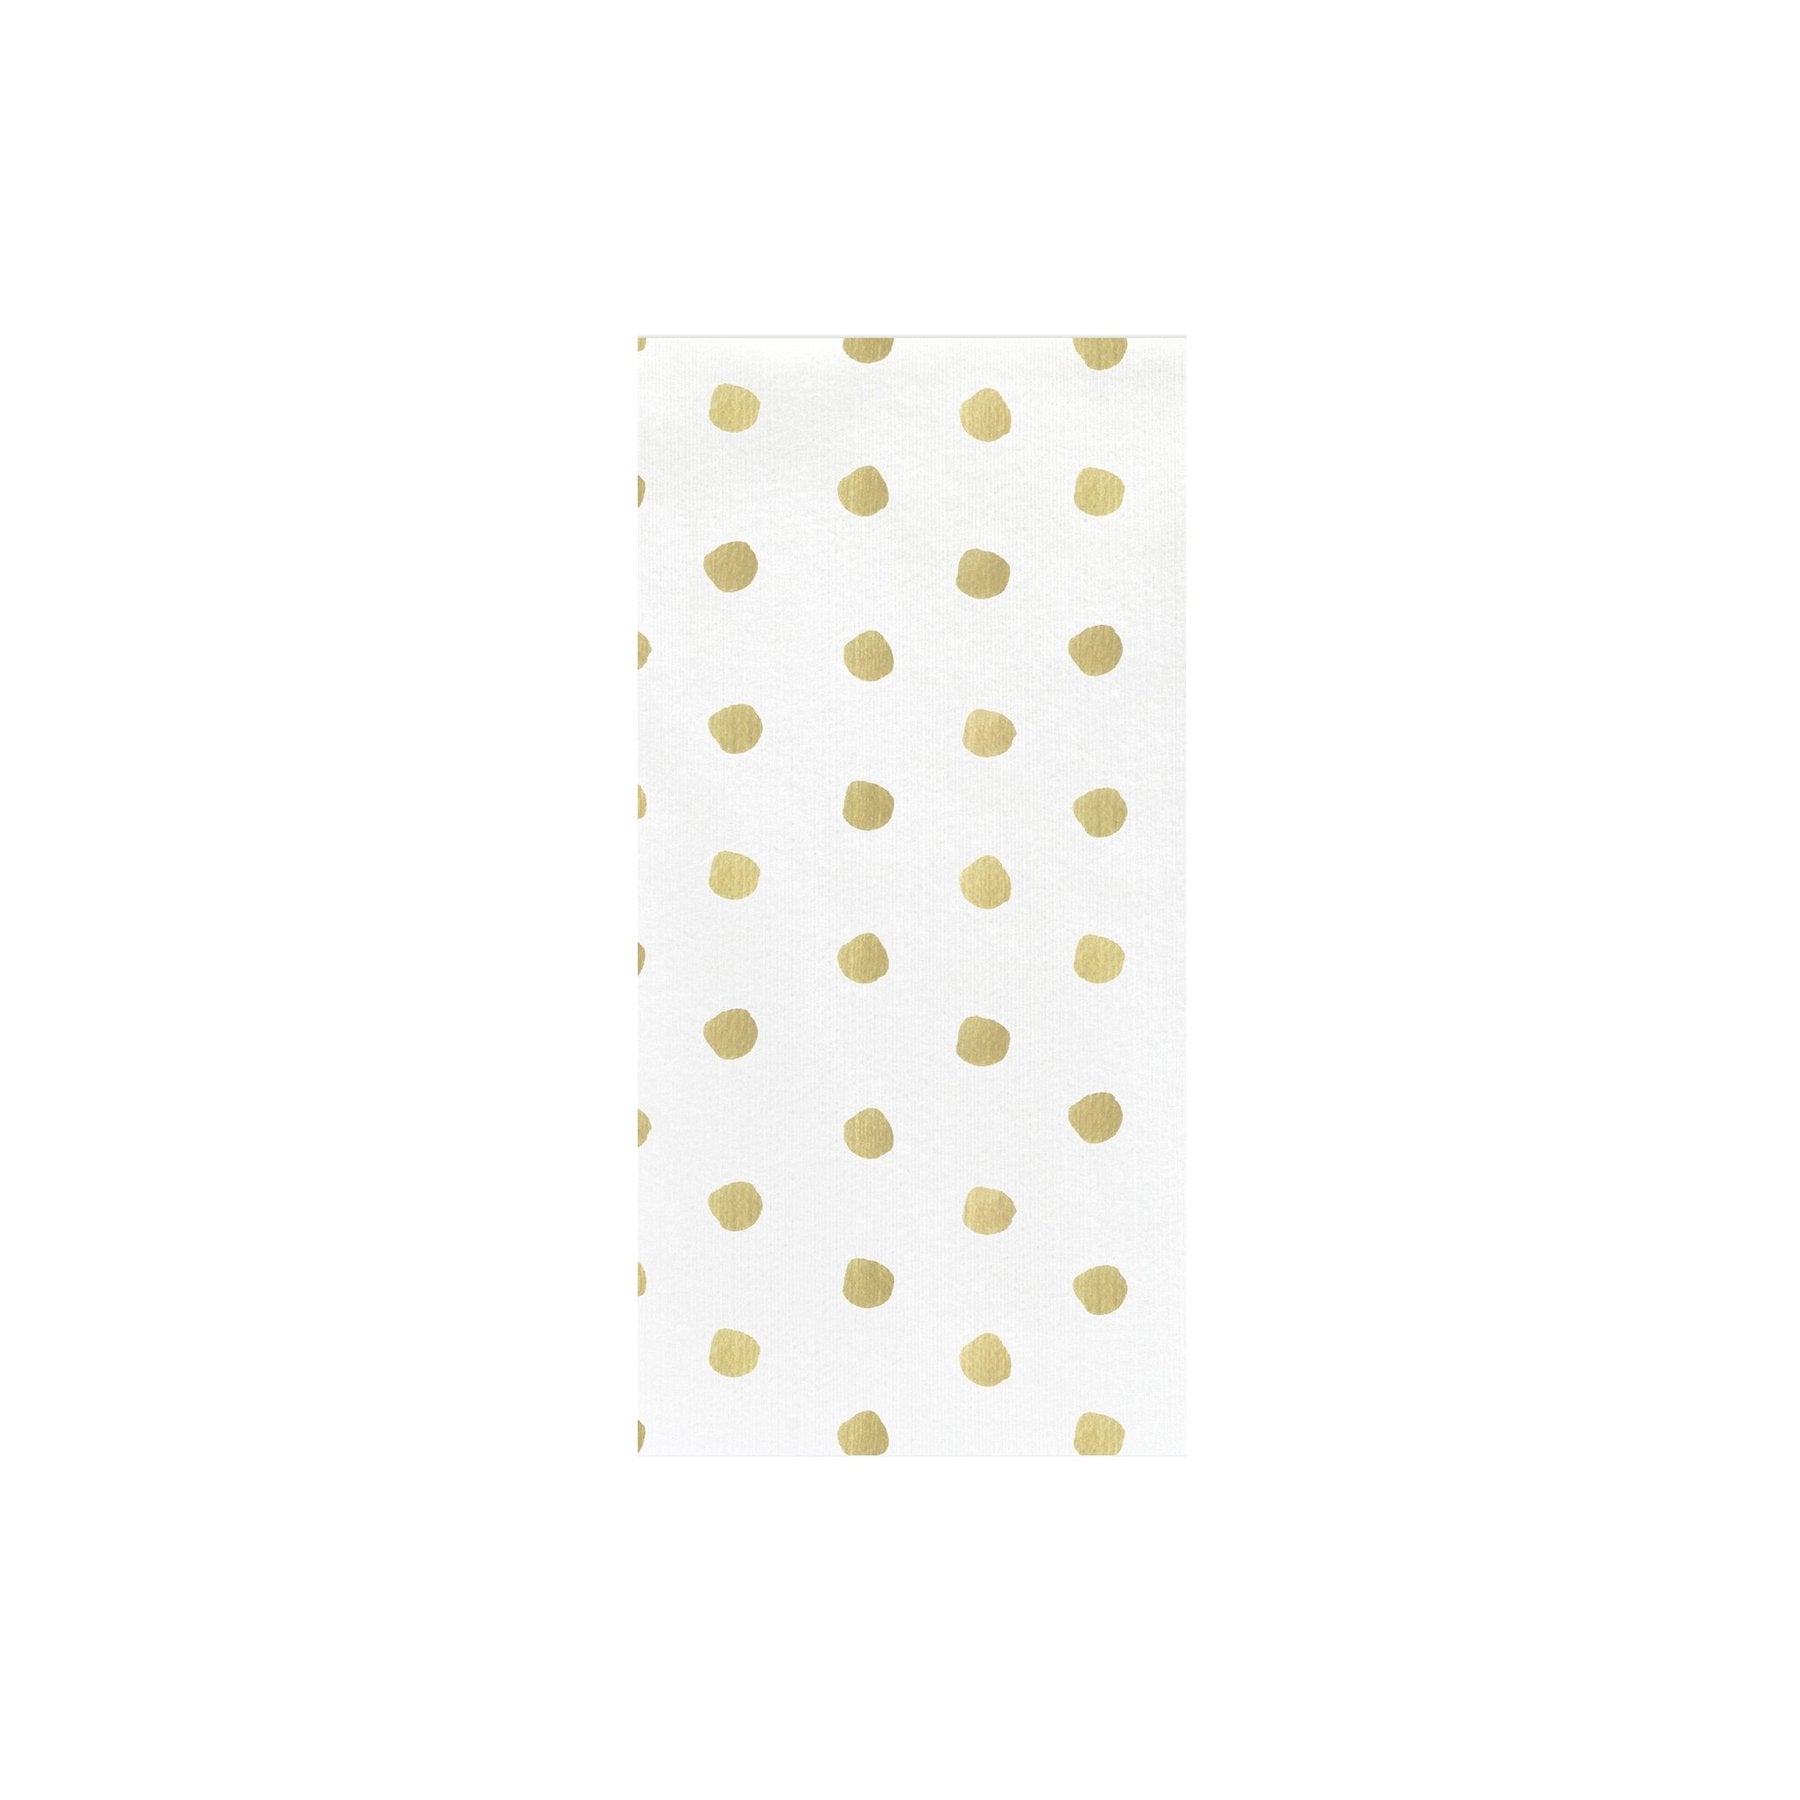 Papersoft Napkins Linen Dot Guest Towels - Pack of 20